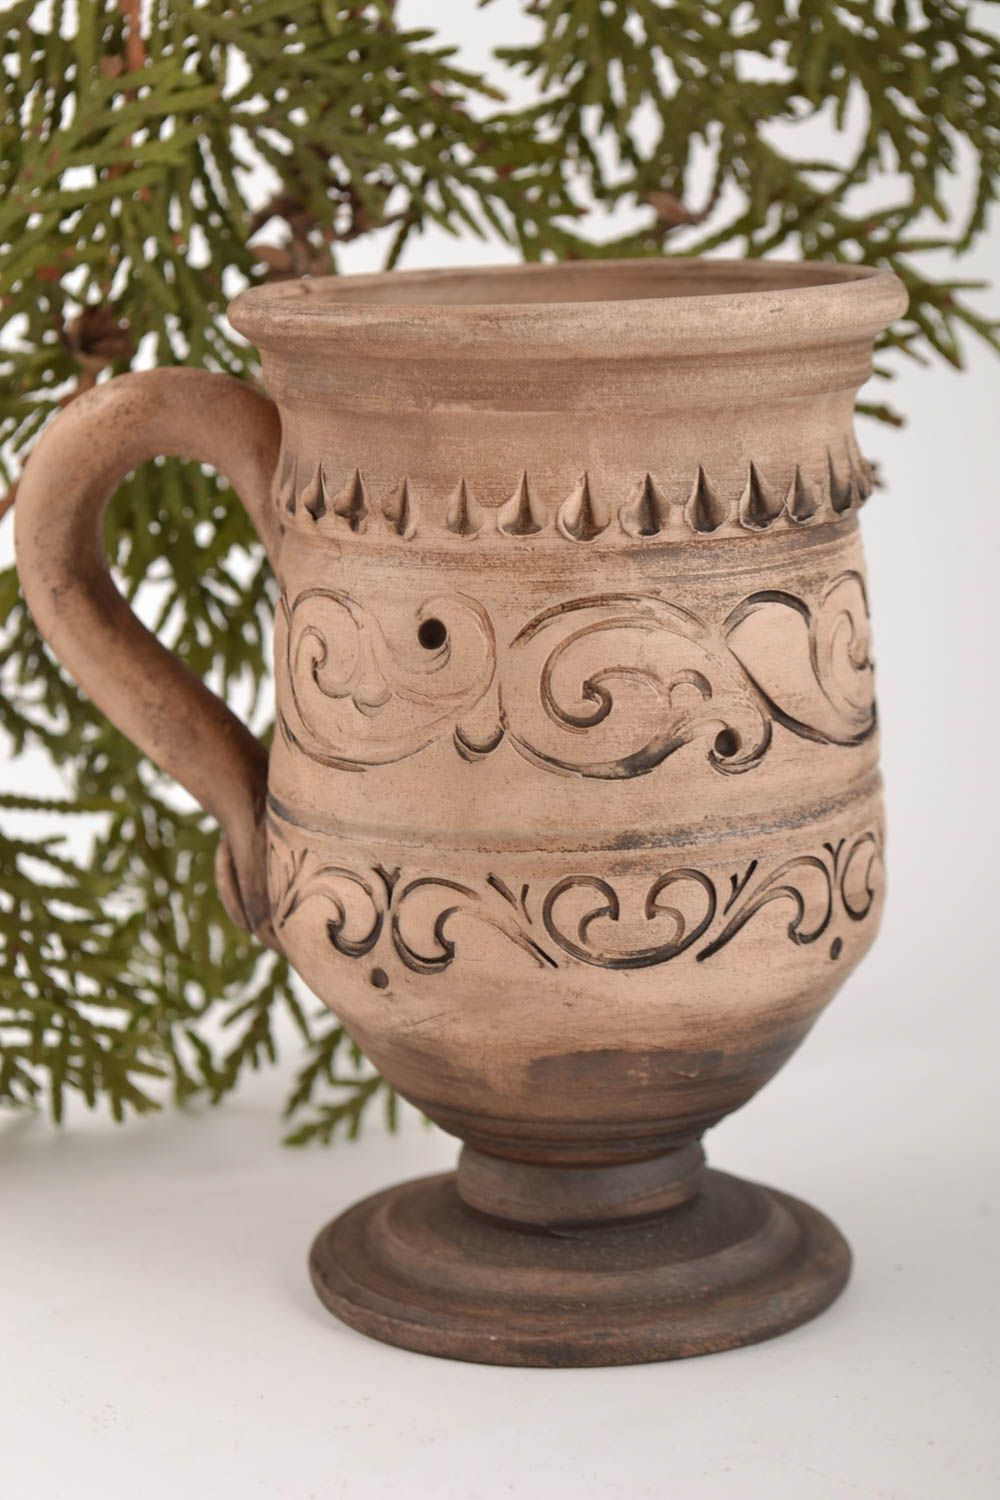 8 oz tall ceramic drinking cup in Italian style 0,51 lb photo 1